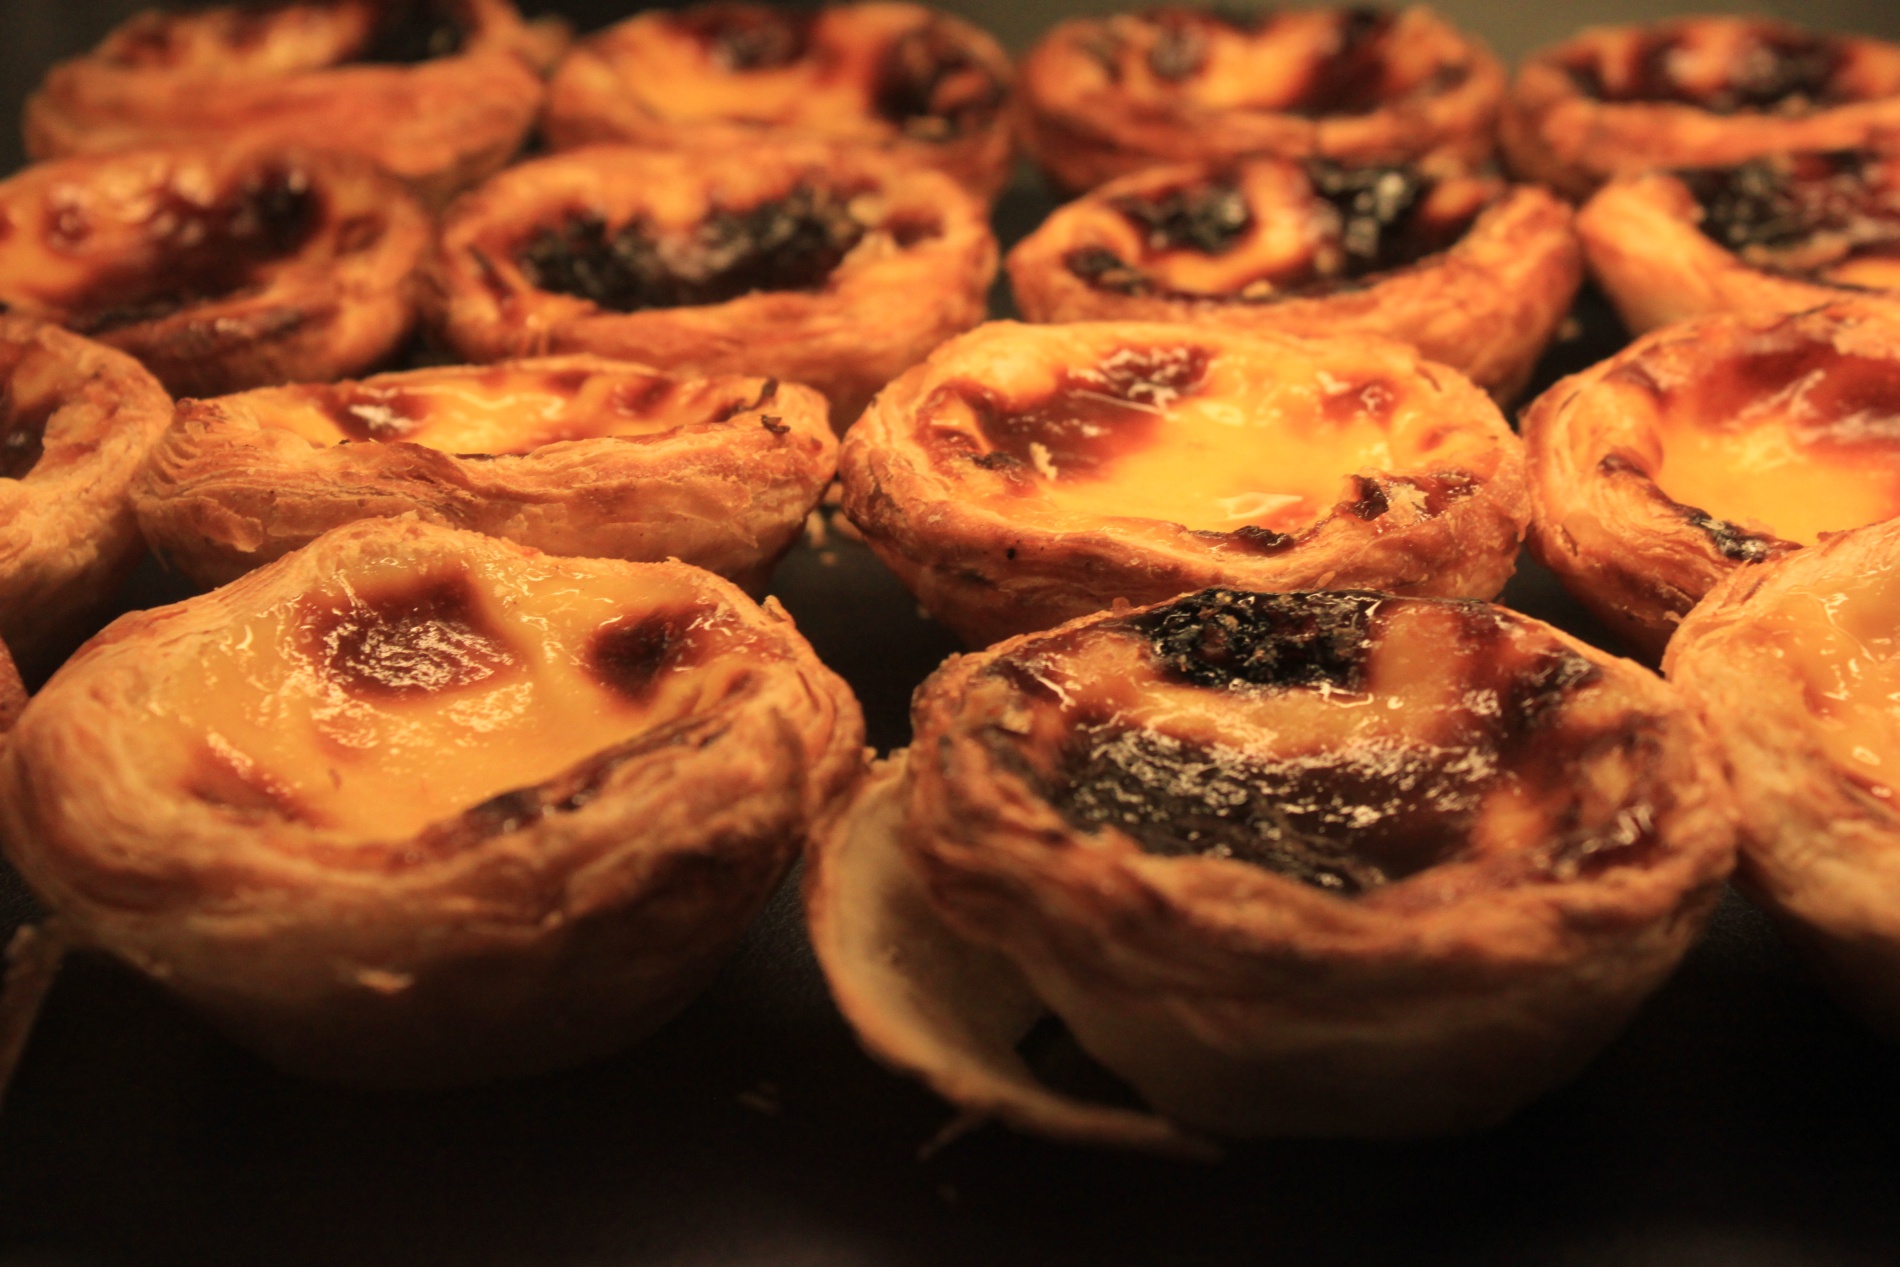 Past&eacute;is de Bel&eacute;m, Portugal's famous custard egg tart, sit on a rack waiting to be purchased.